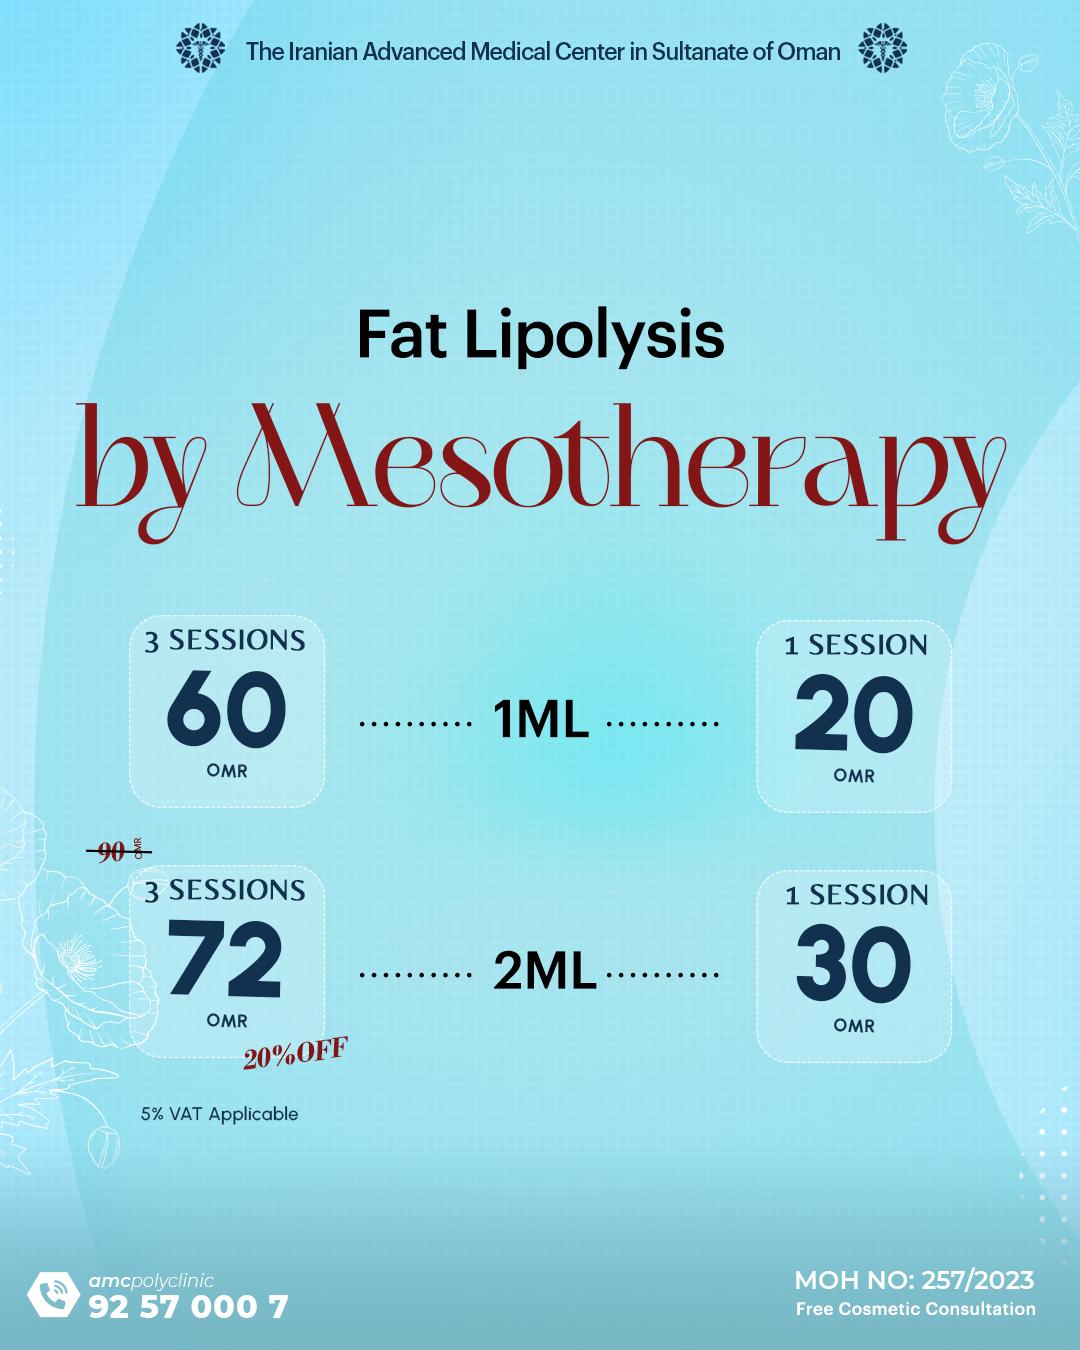 Fat Lipolysis by Mesotherapy